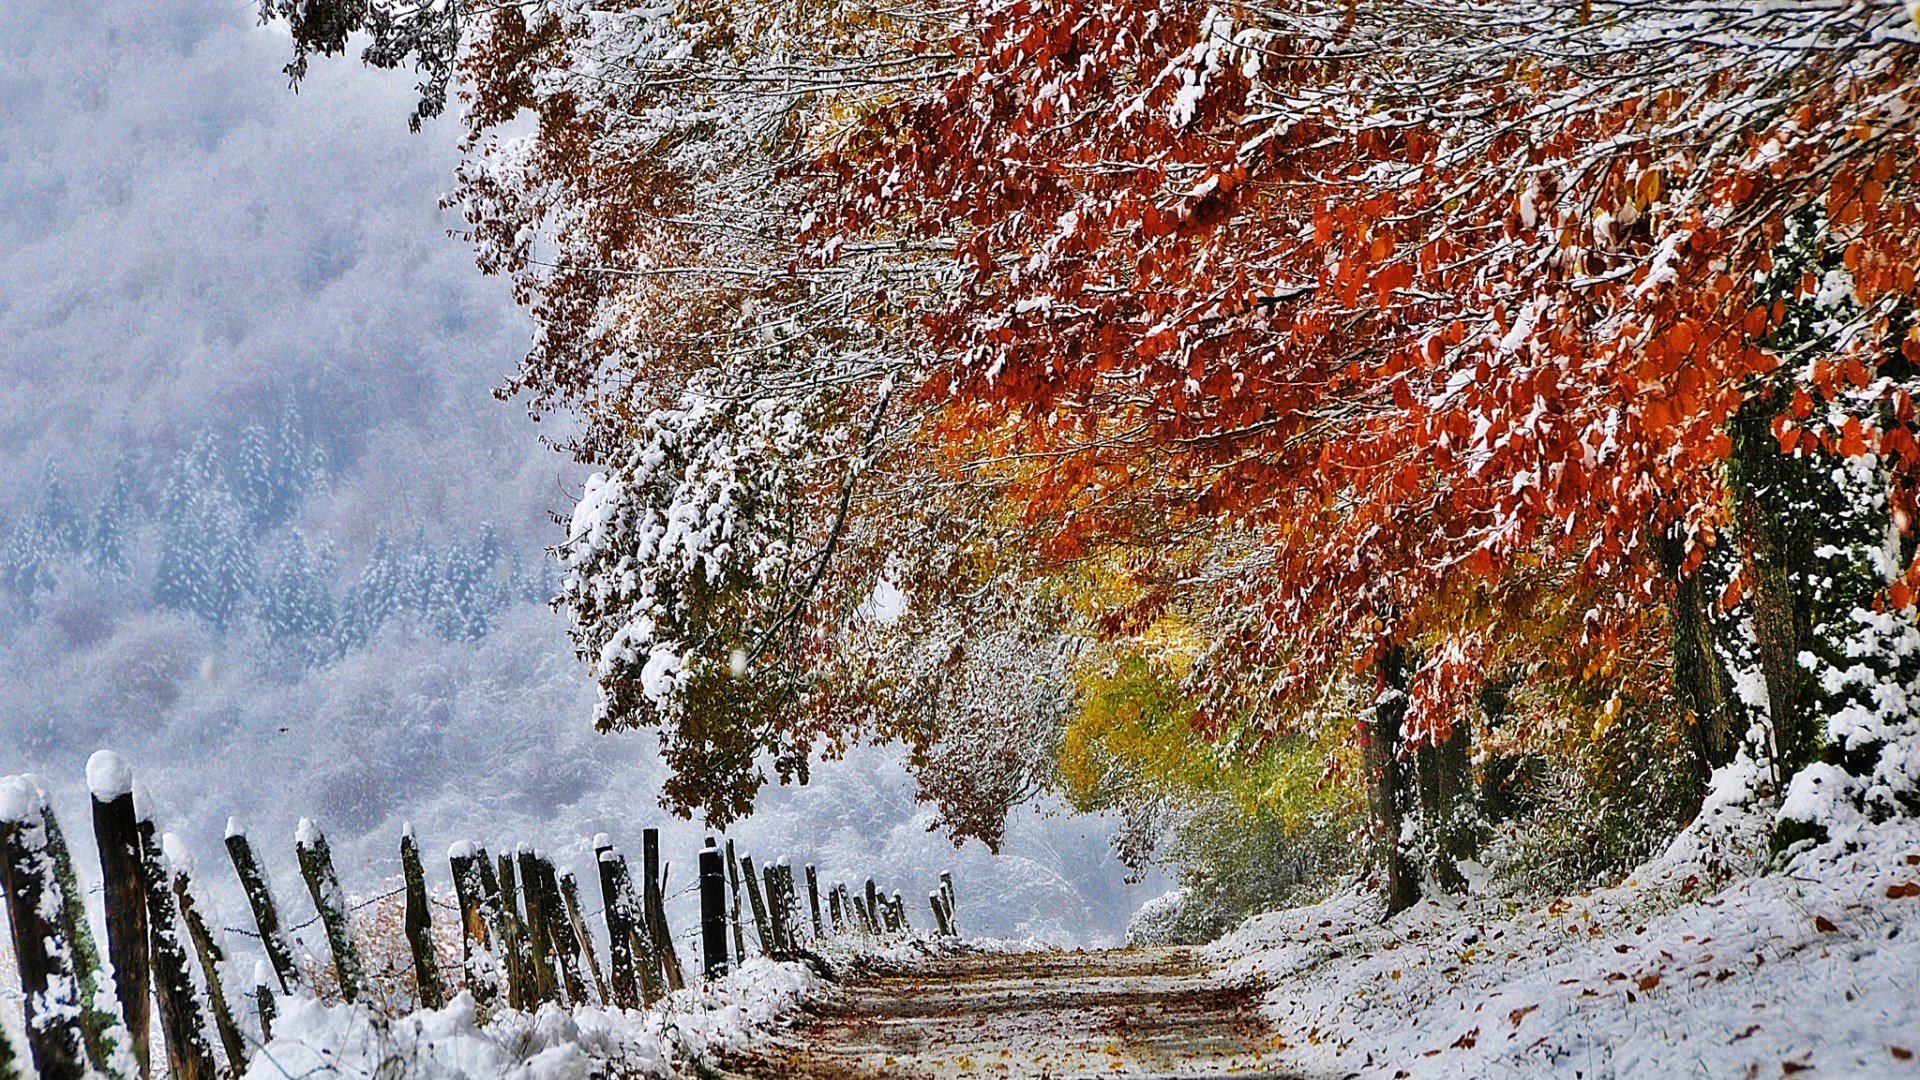 Download Wallpaper autumn snow path france trail november, 1920x Between autumn and winter